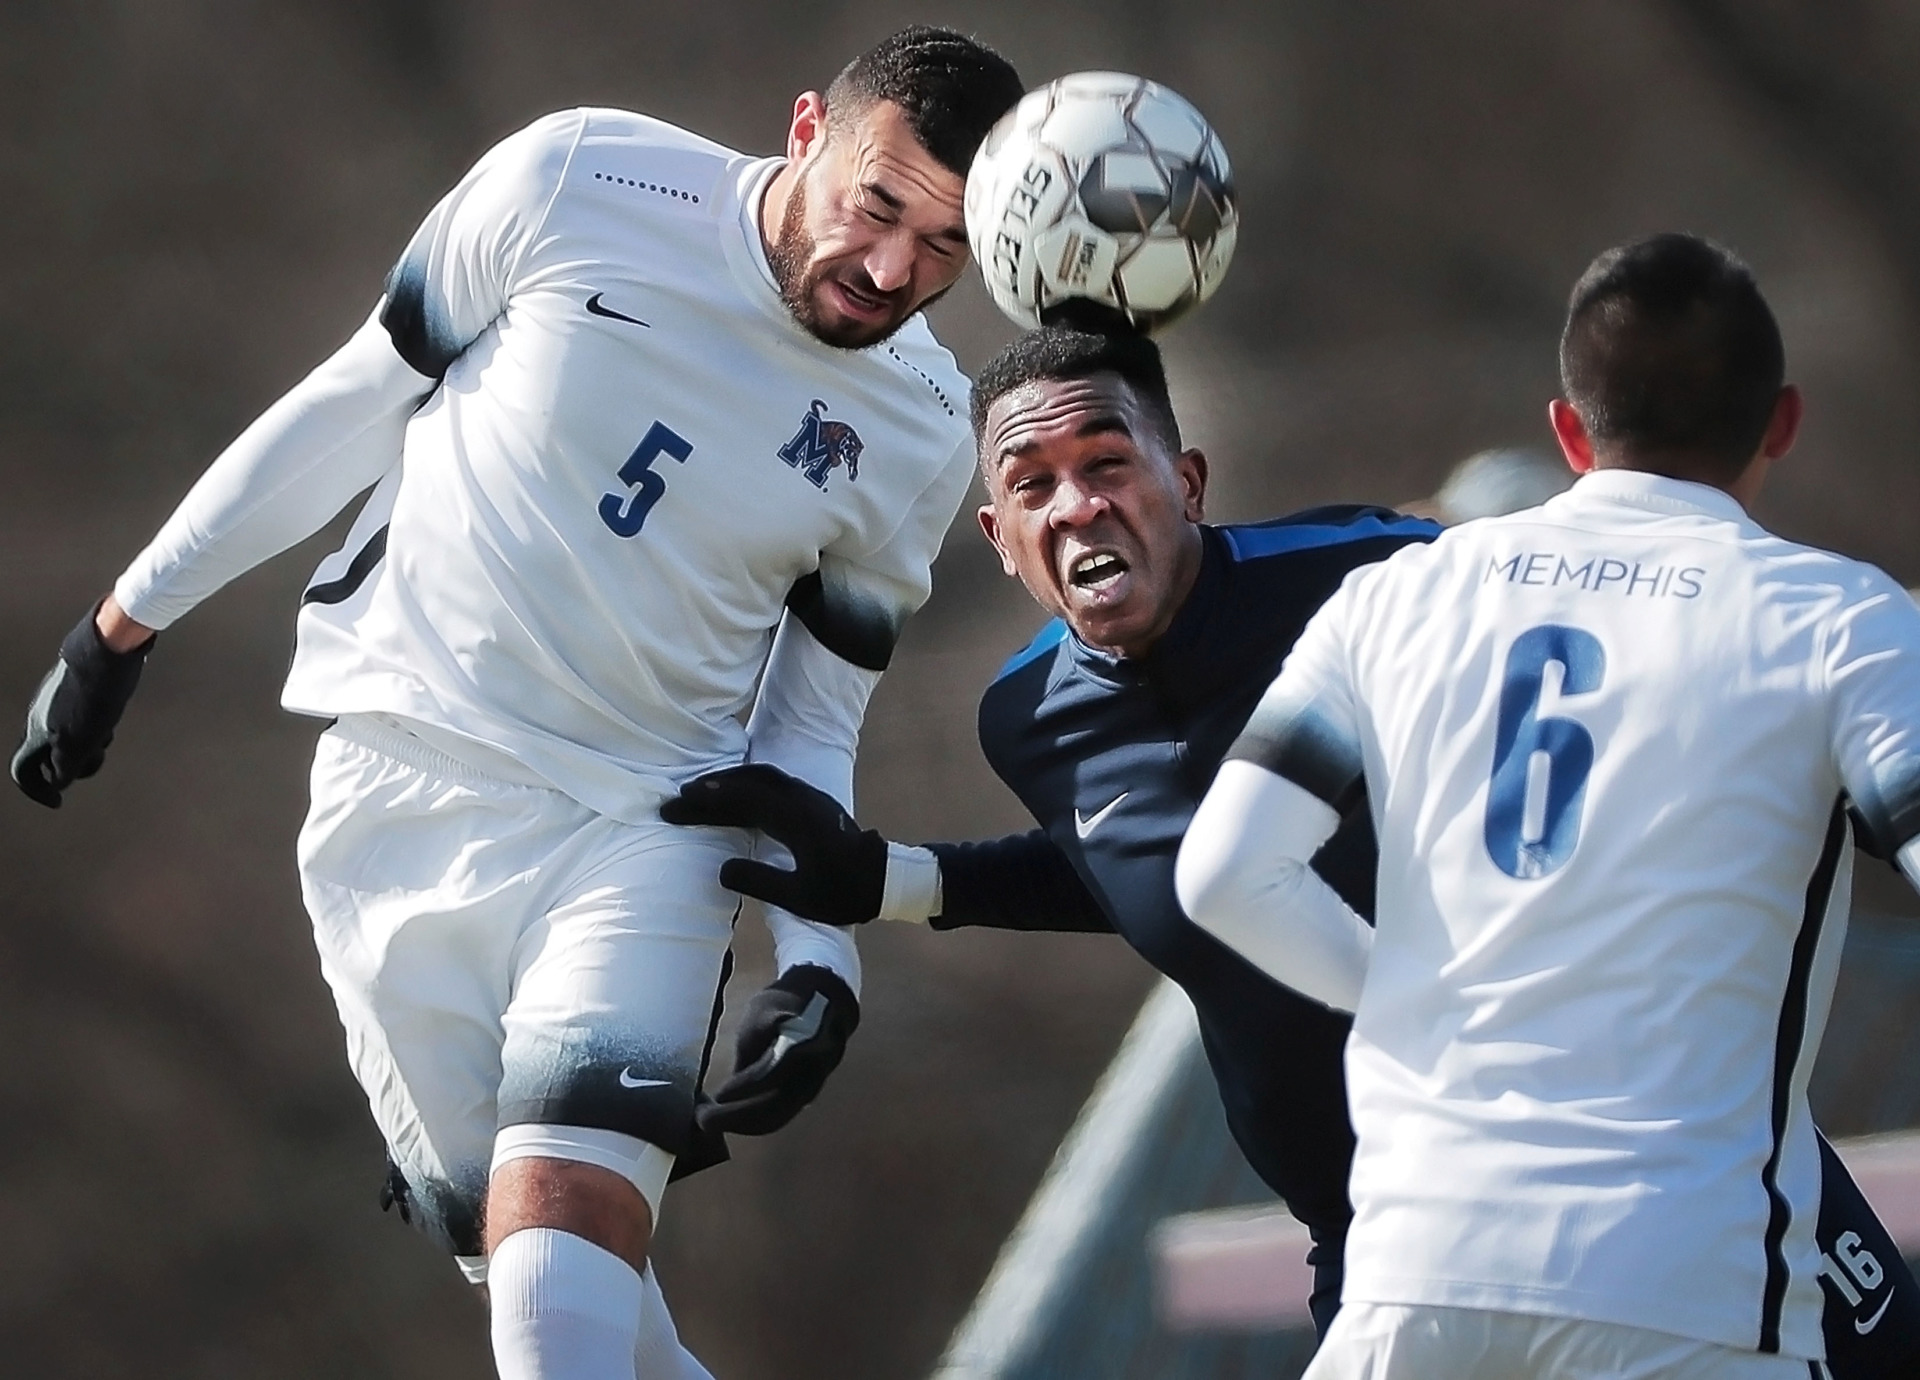 <strong>Memphis 901 FC forward Heviel Cordoves (center) battles for a header with University of Memphis defender Justyn Thomas during an exhibition game against the Tigers soccer team at the U of M south campus on Feb. 9, 2019.</strong> (Jim Weber/Daily Memphian)